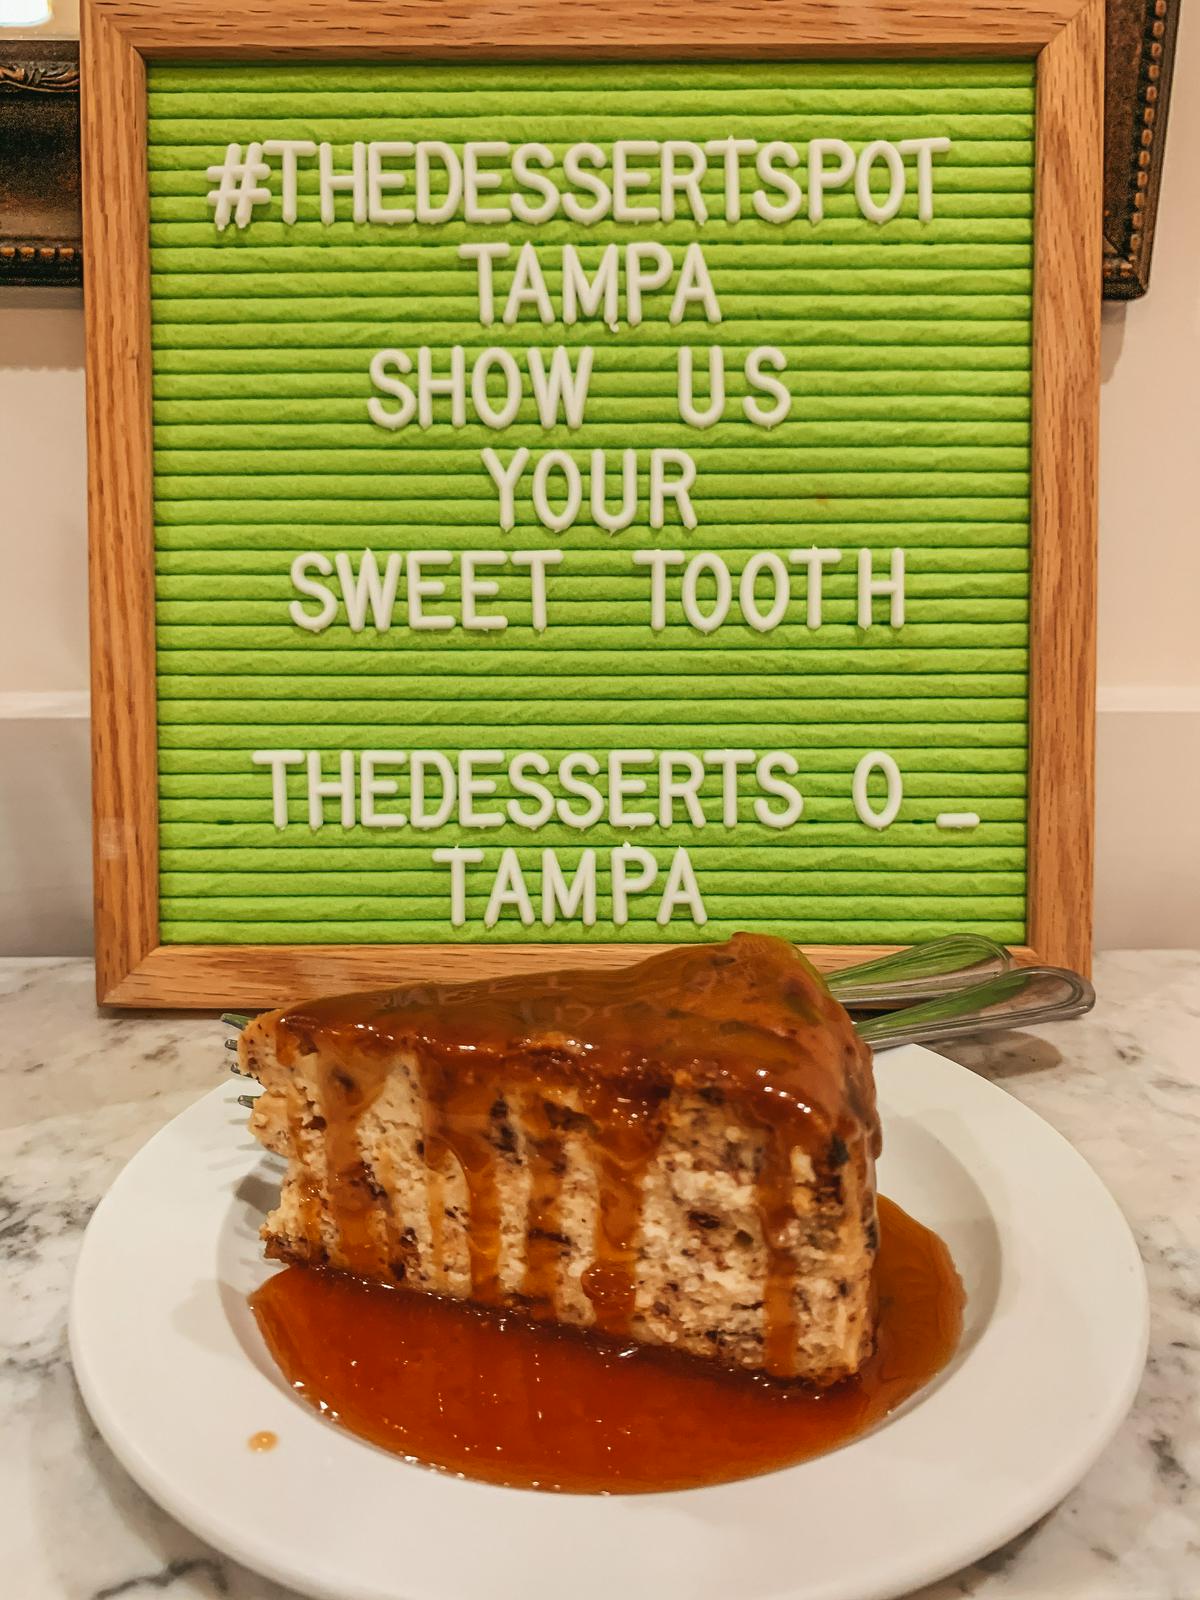 Toffee cheesecake from The Dessert Spot in Tampa